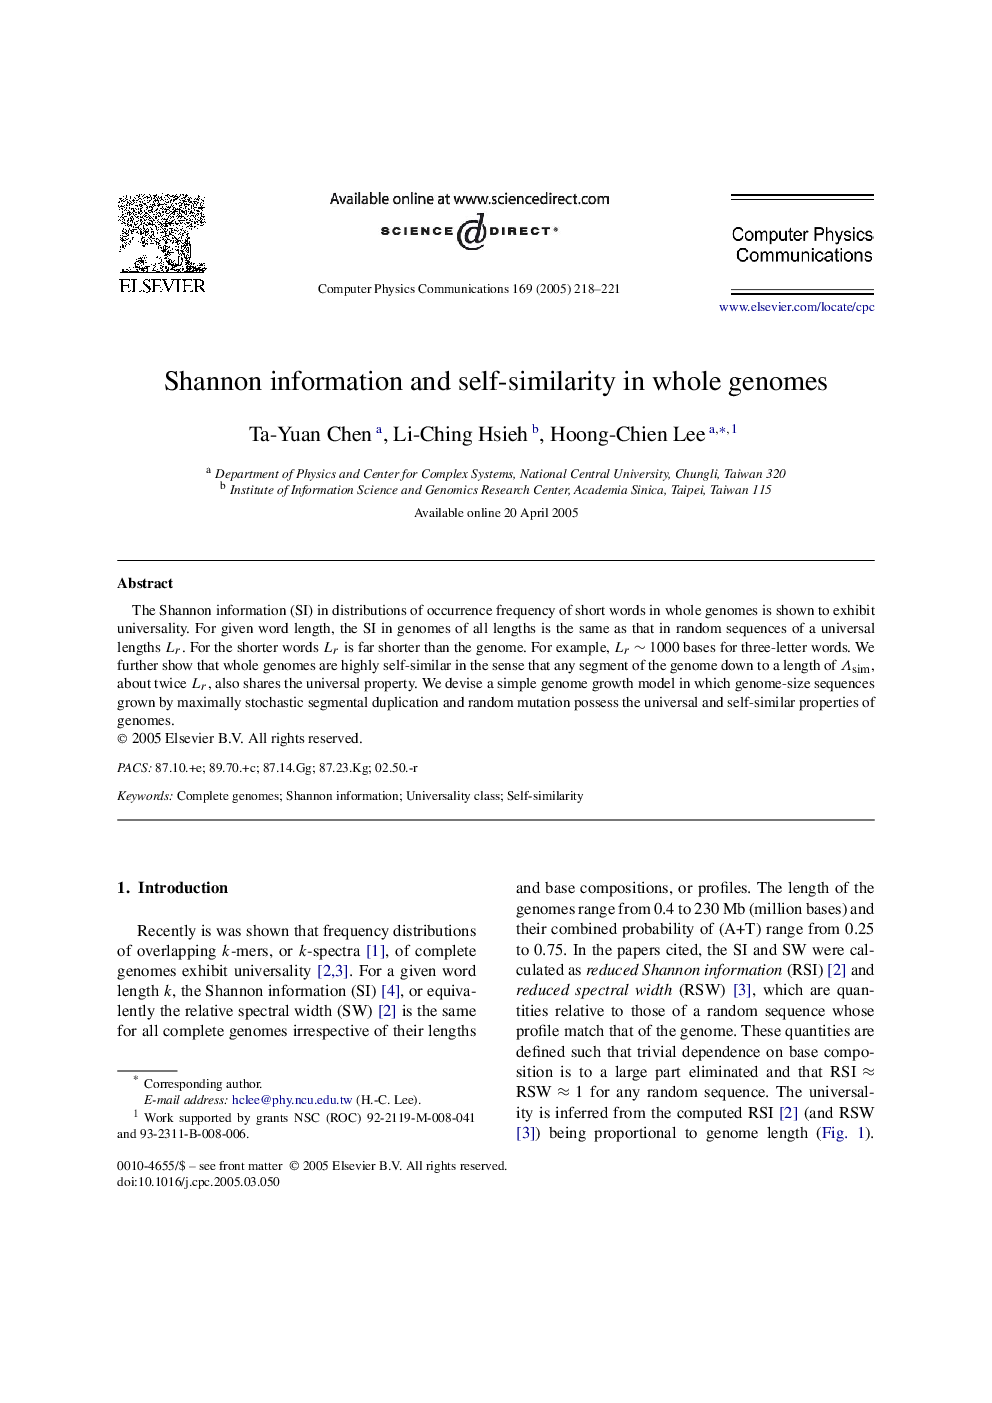 Shannon information and self-similarity in whole genomes